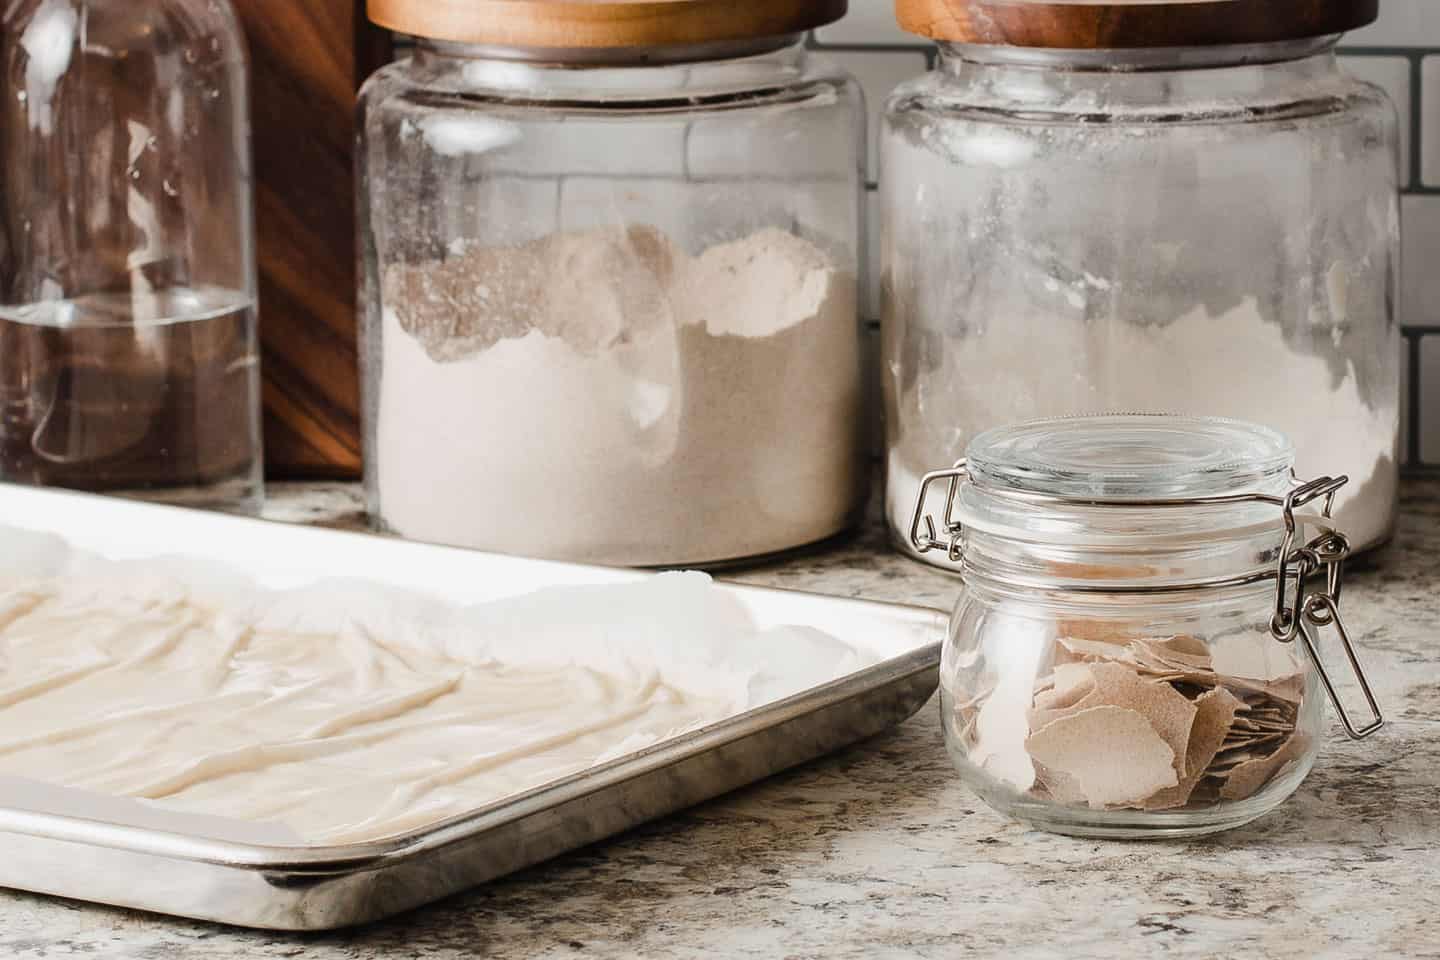 A baking sheet and a jar with dried sourdough starter.